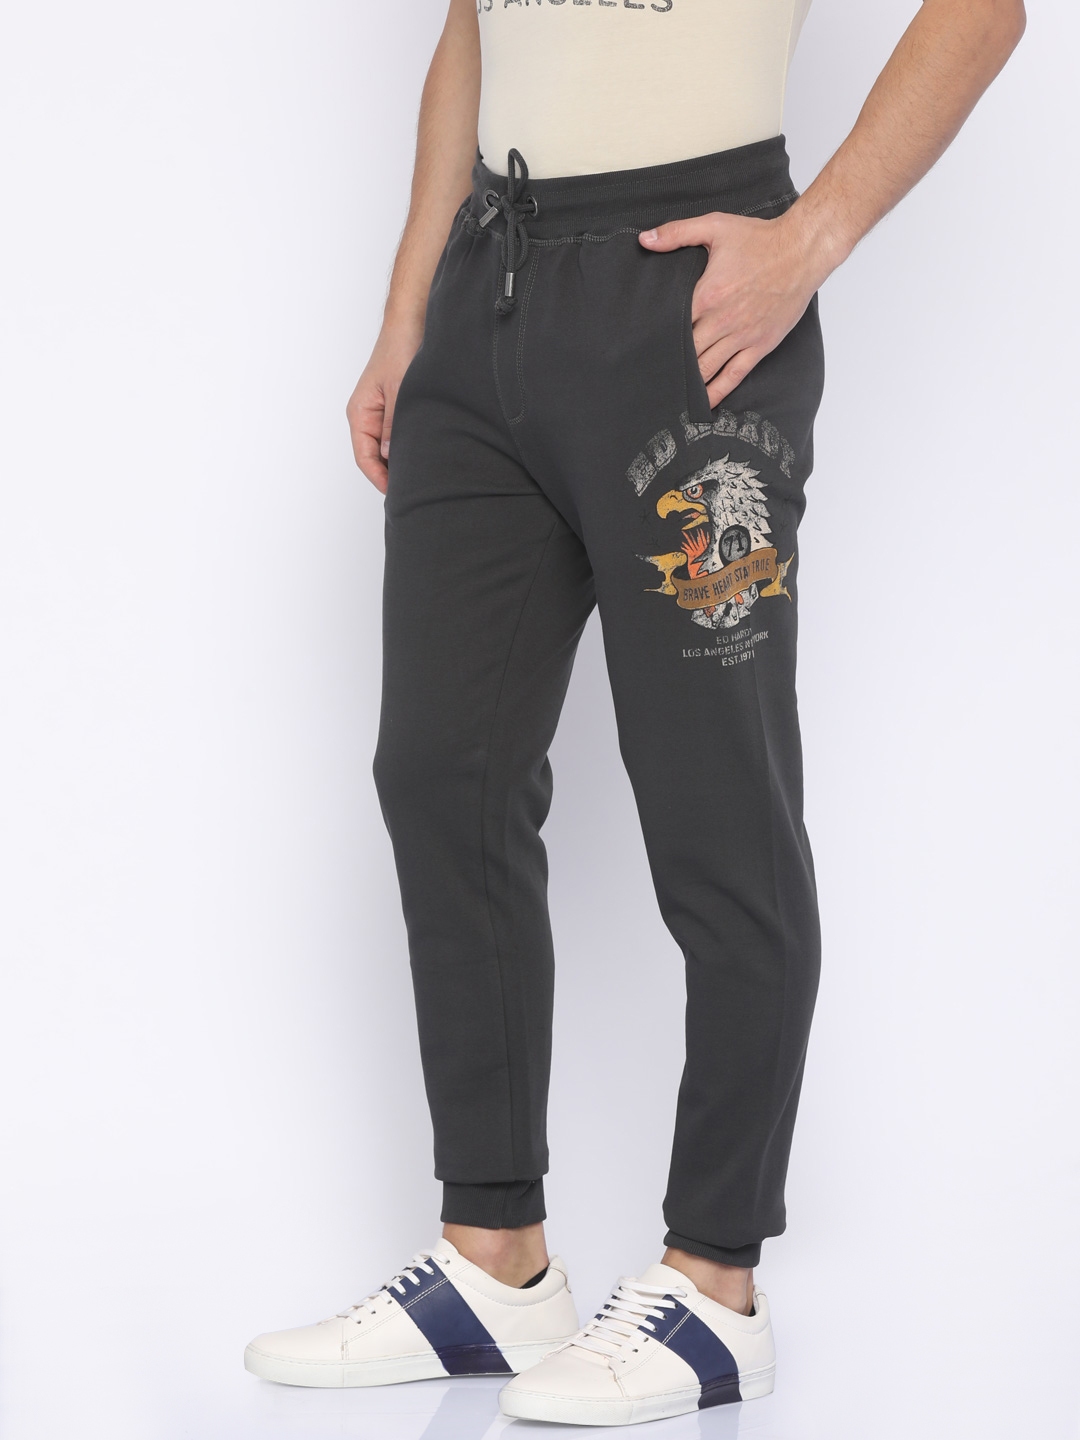 Ed Hardy Dragon Sphere Cargo Pants  Urban Outfitters UK